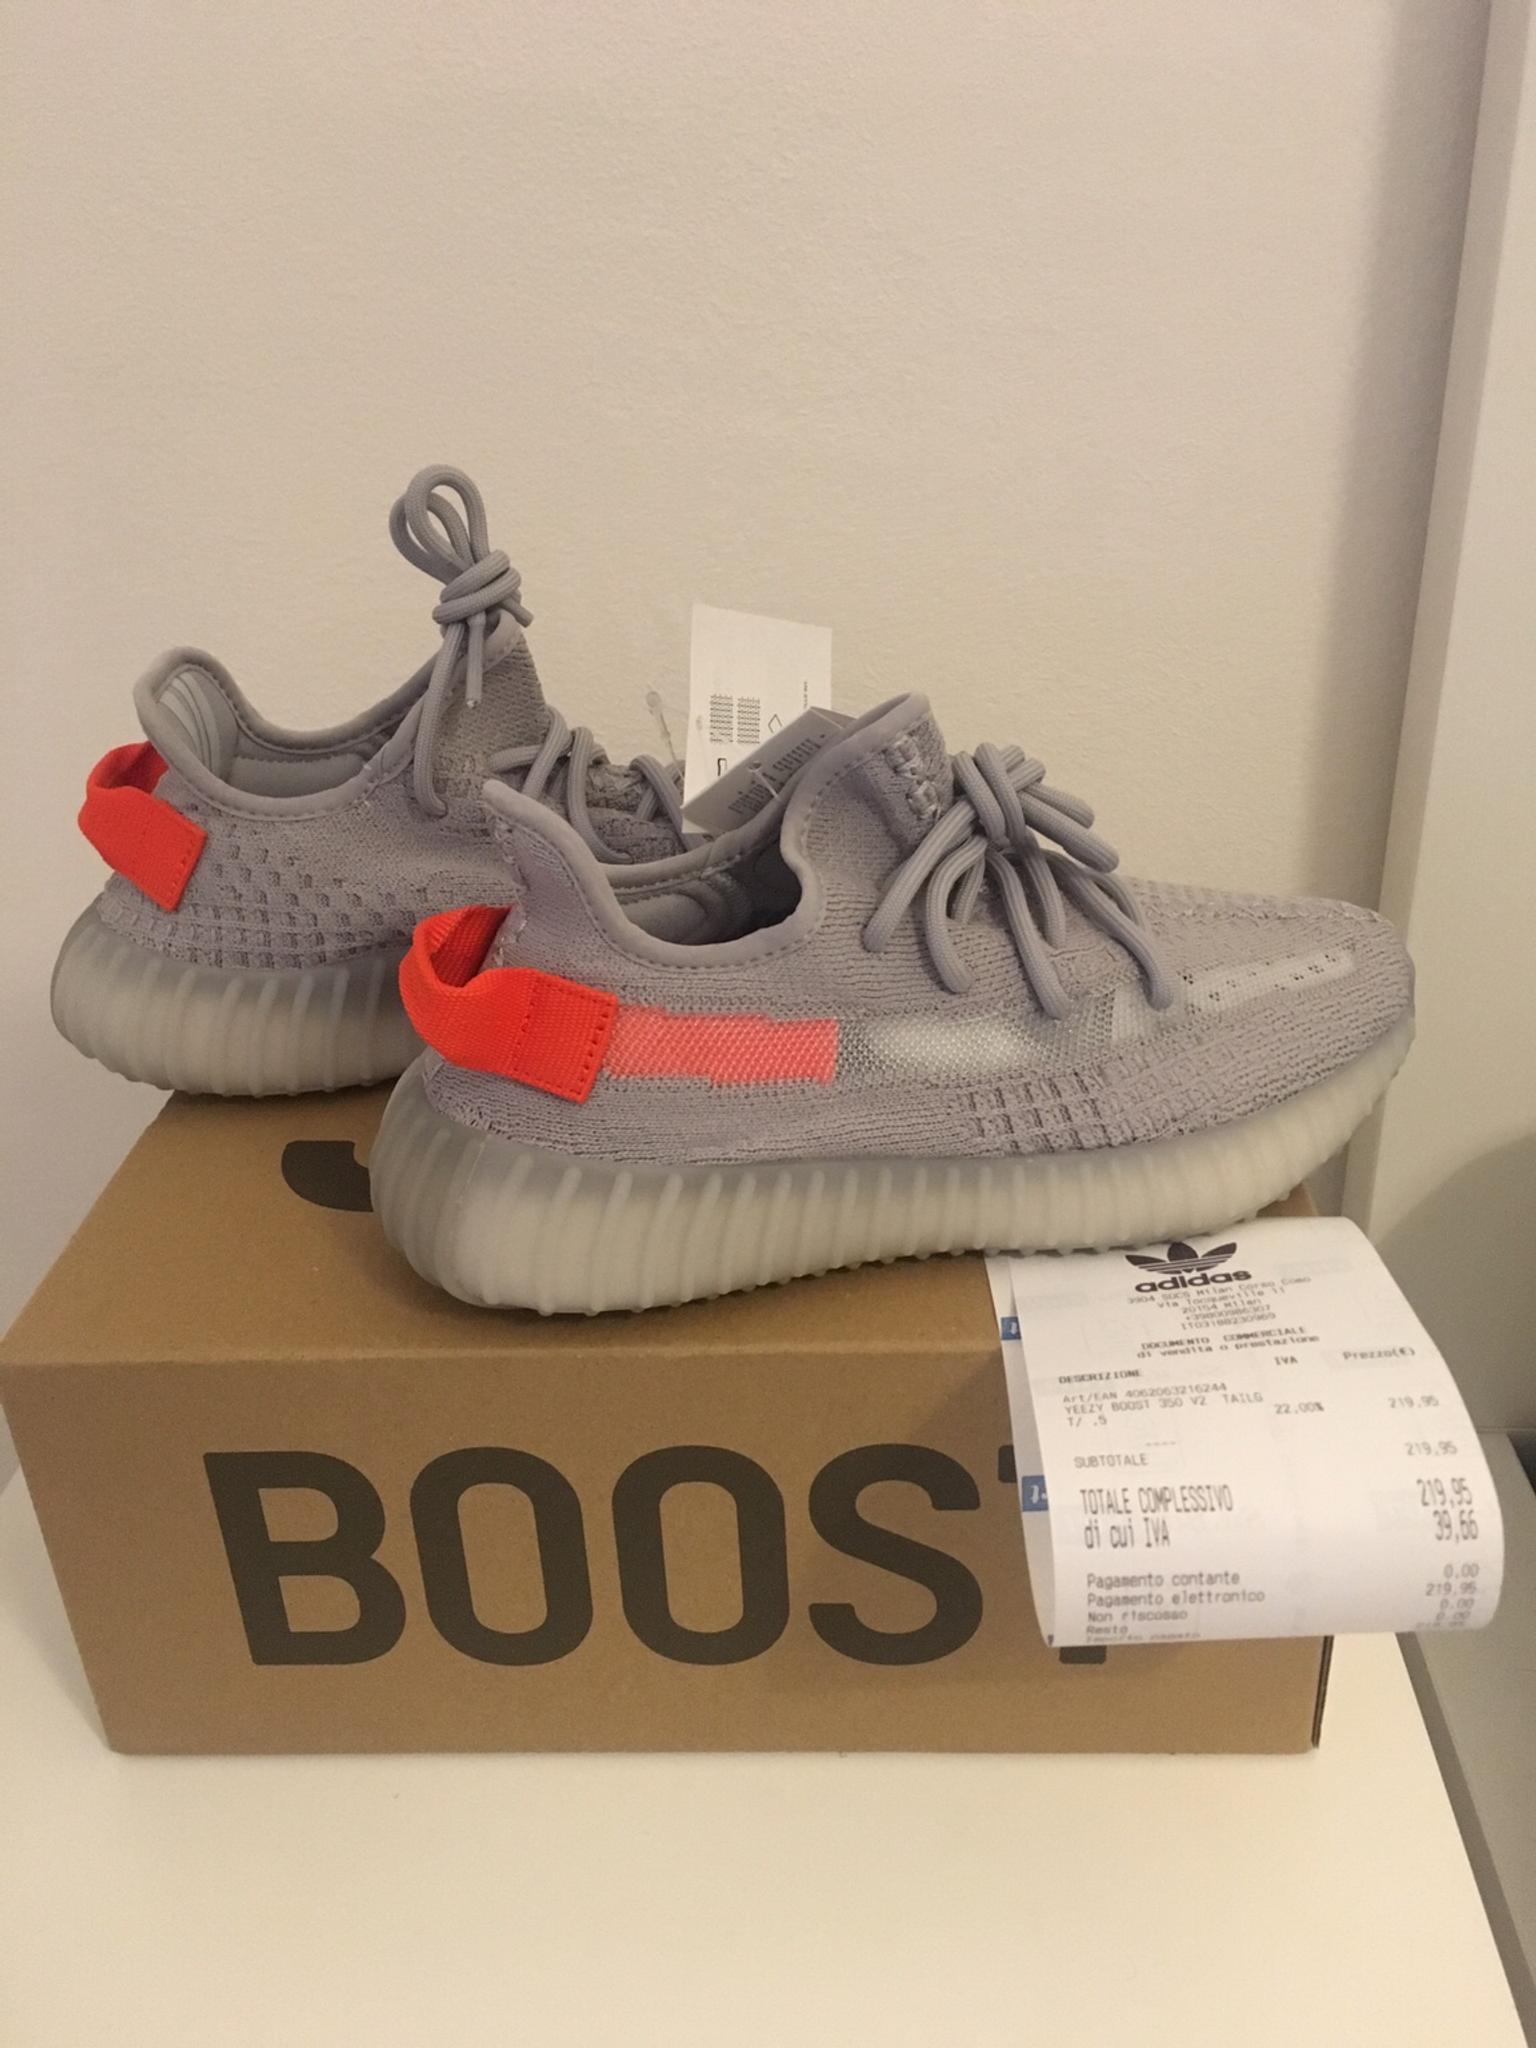 Adidas Yeezy 350 V2 Tail Light EU 38 in 20131 Milan for €319.00 for sale |  Shpock